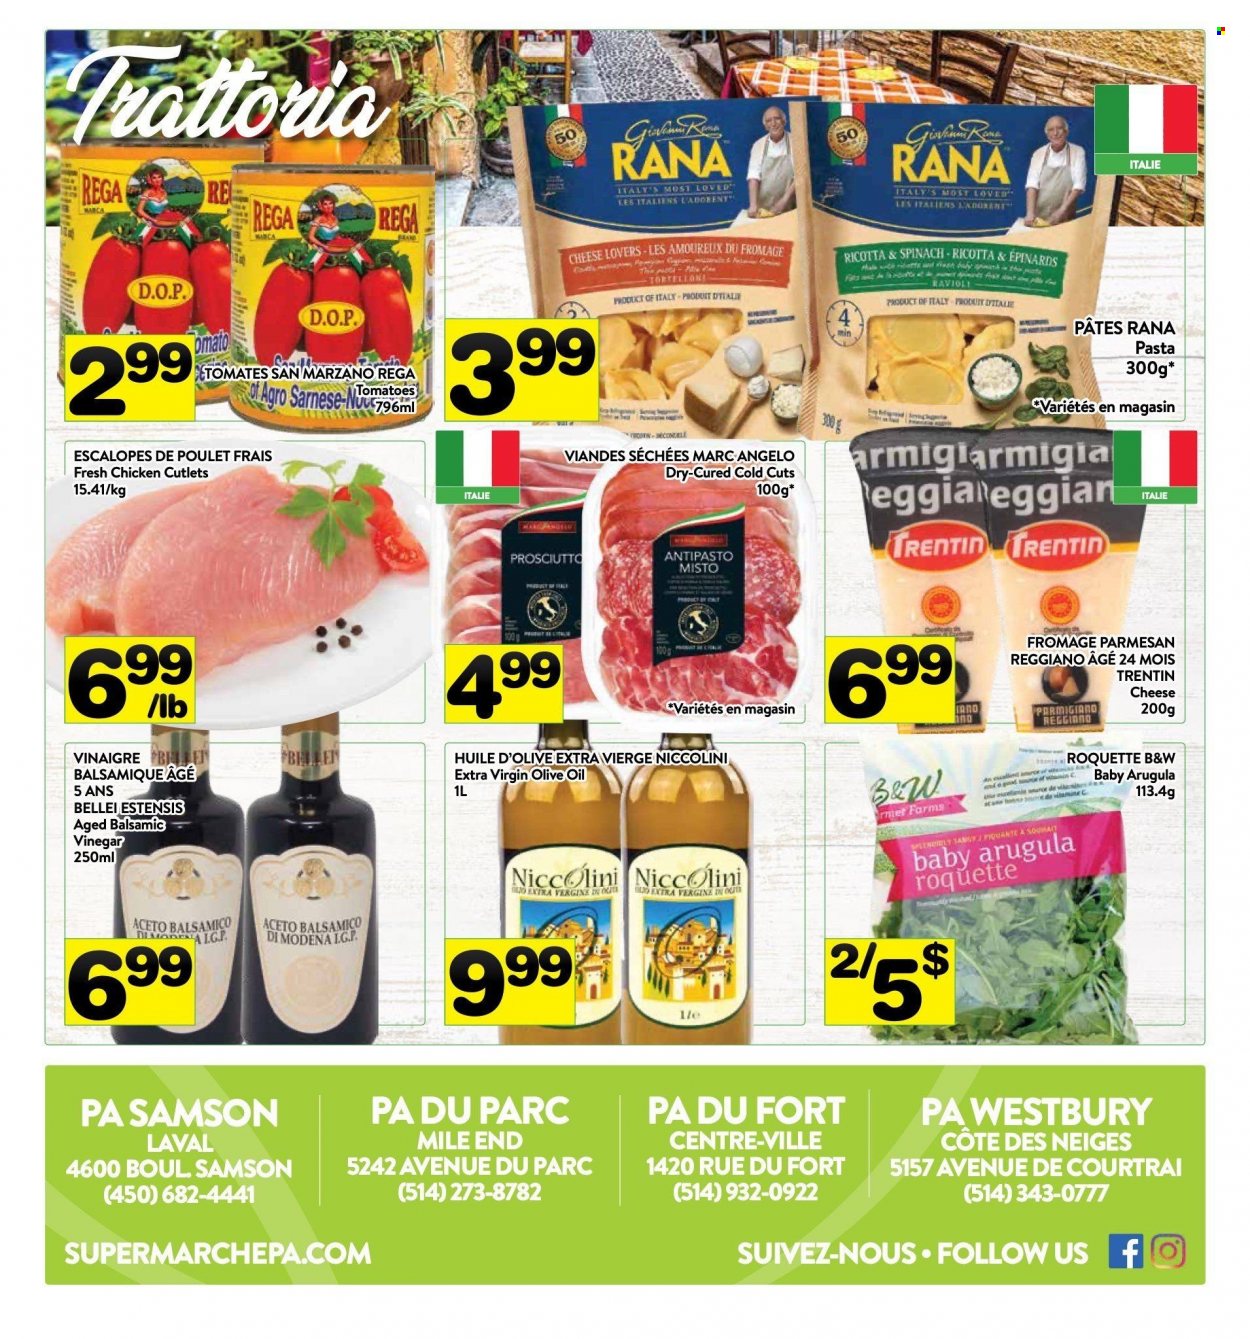 thumbnail - PA Supermarché Flyer - October 18, 2021 - October 24, 2021 - Sales products - arugula, spinach, tomatoes, ravioli, pasta, Rana, prosciutto, parmesan, cheese, Parmigiano Reggiano, balsamic vinegar, extra virgin olive oil, vinegar, olive oil, oil, chicken breasts, chicken cutlets, chicken, ricotta. Page 7.